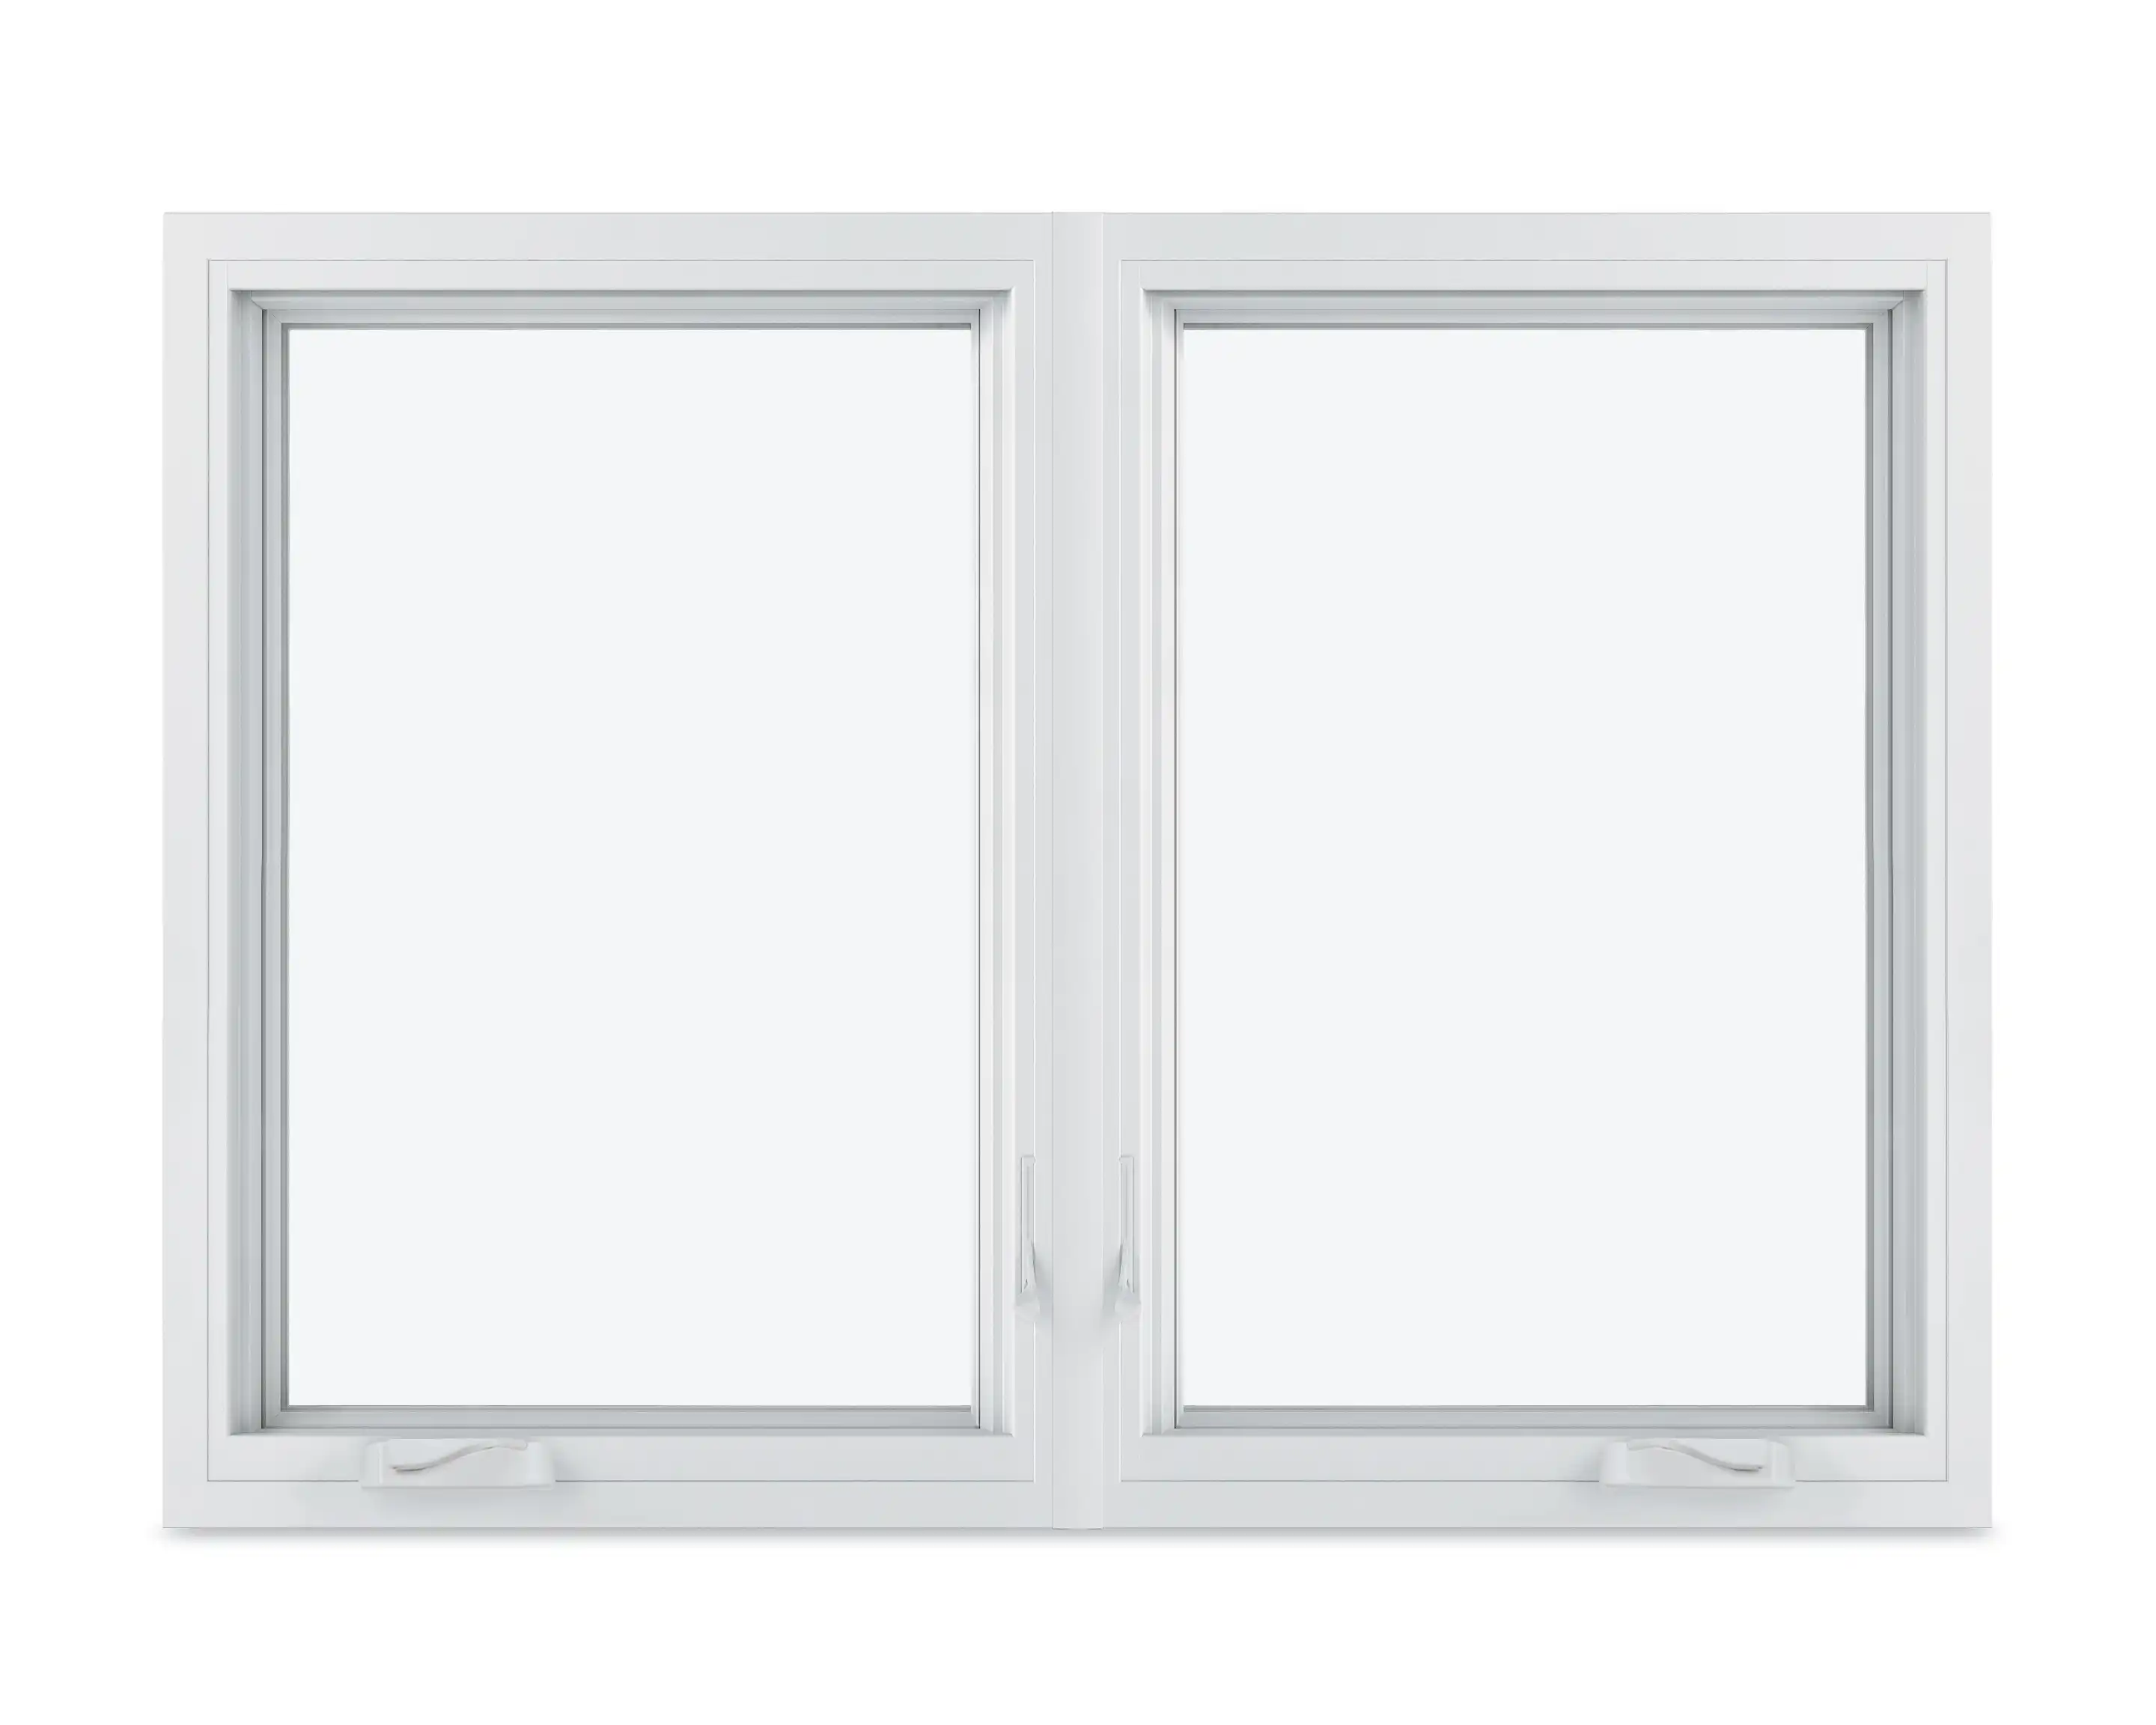 View of a Marvin Replacement two-wide Casement window configuration.